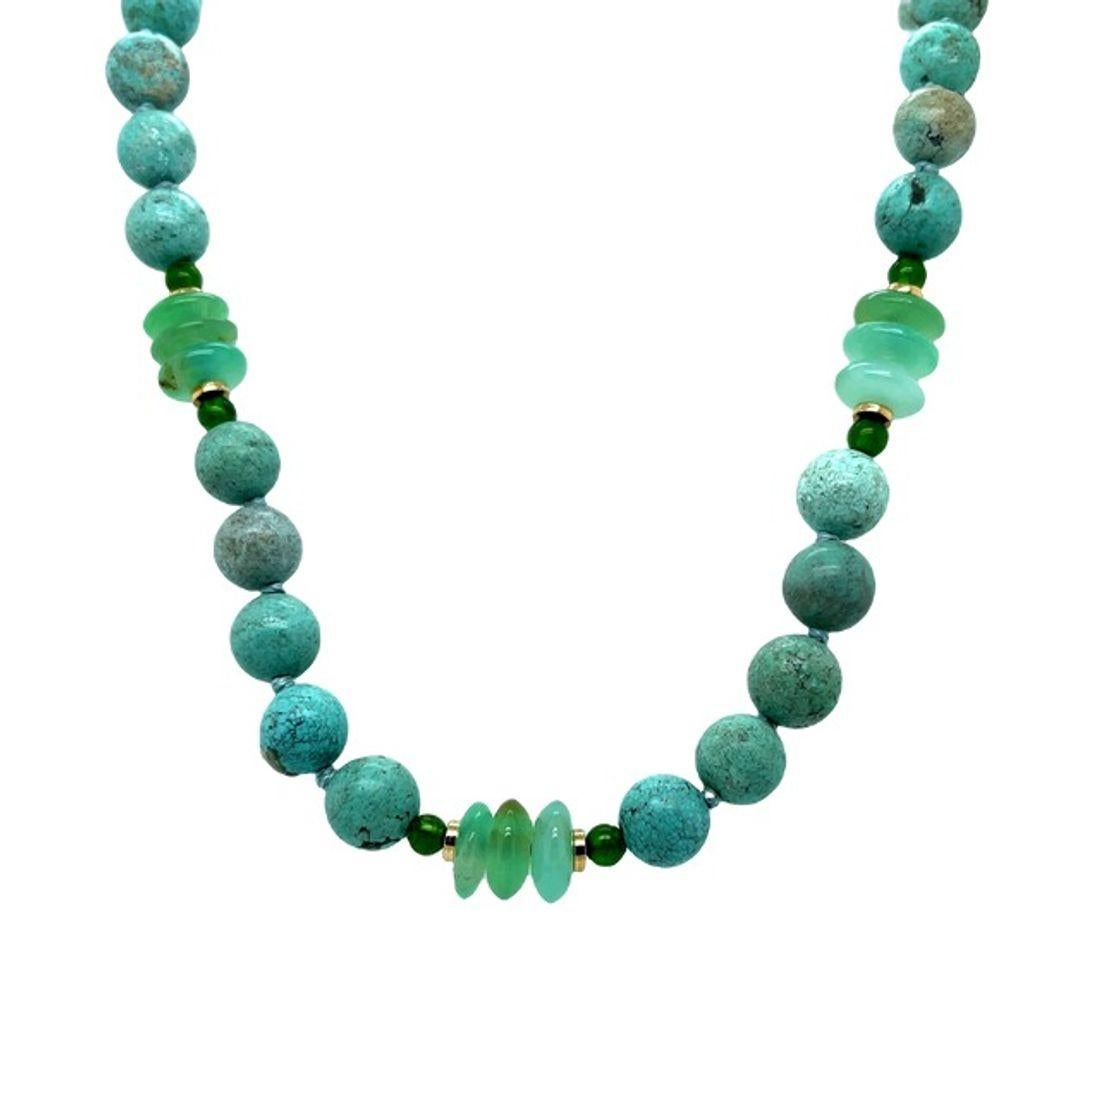 Bead Turquoise, Chrome Diopside and Chrysoprase Necklace, 21 Inches For Sale